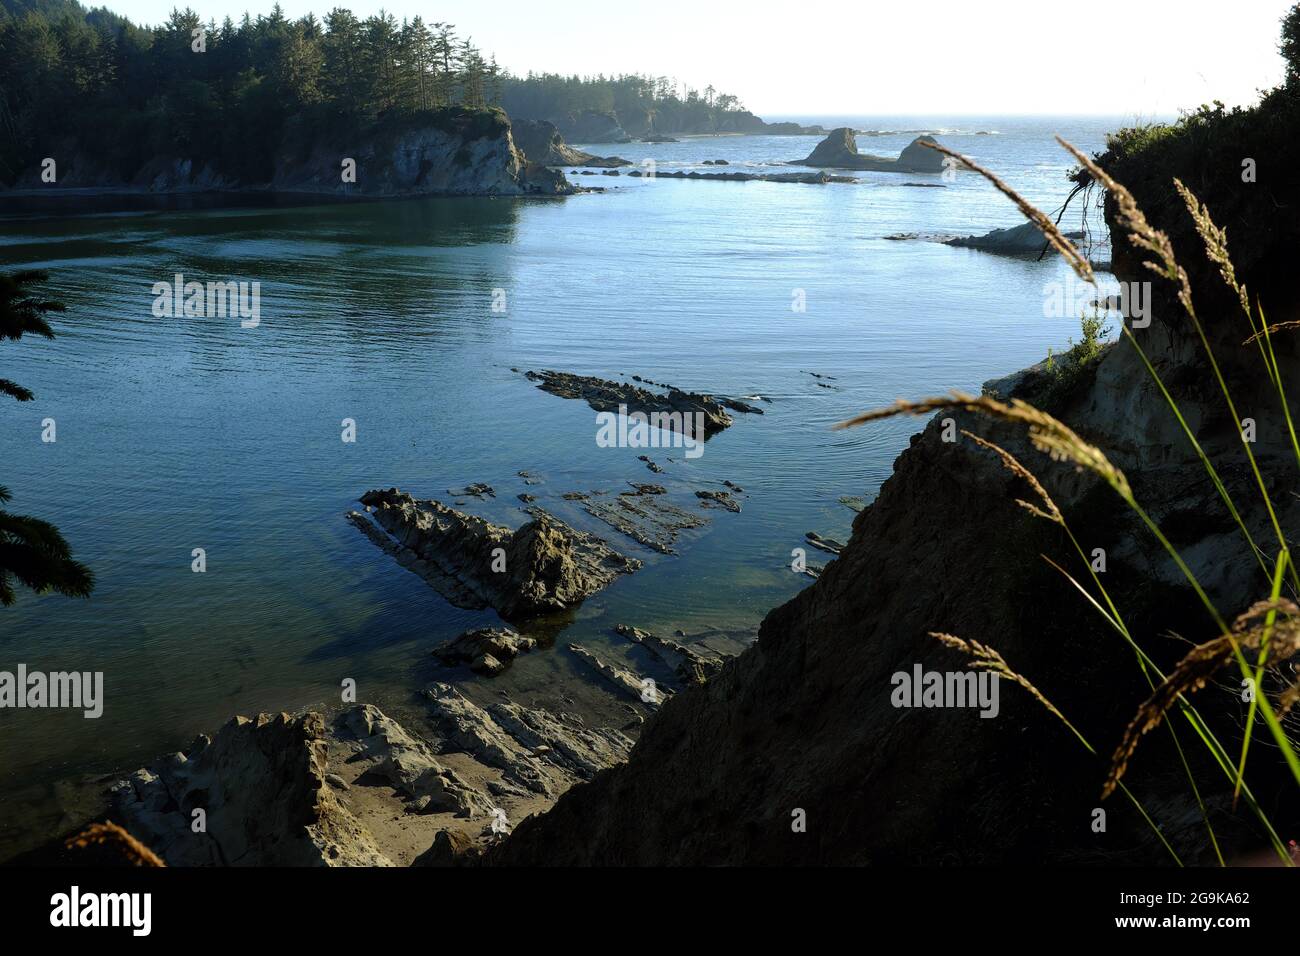 The calm waters of Sunset Bay State Park on Cape Arago, Oregon. Stock Photo